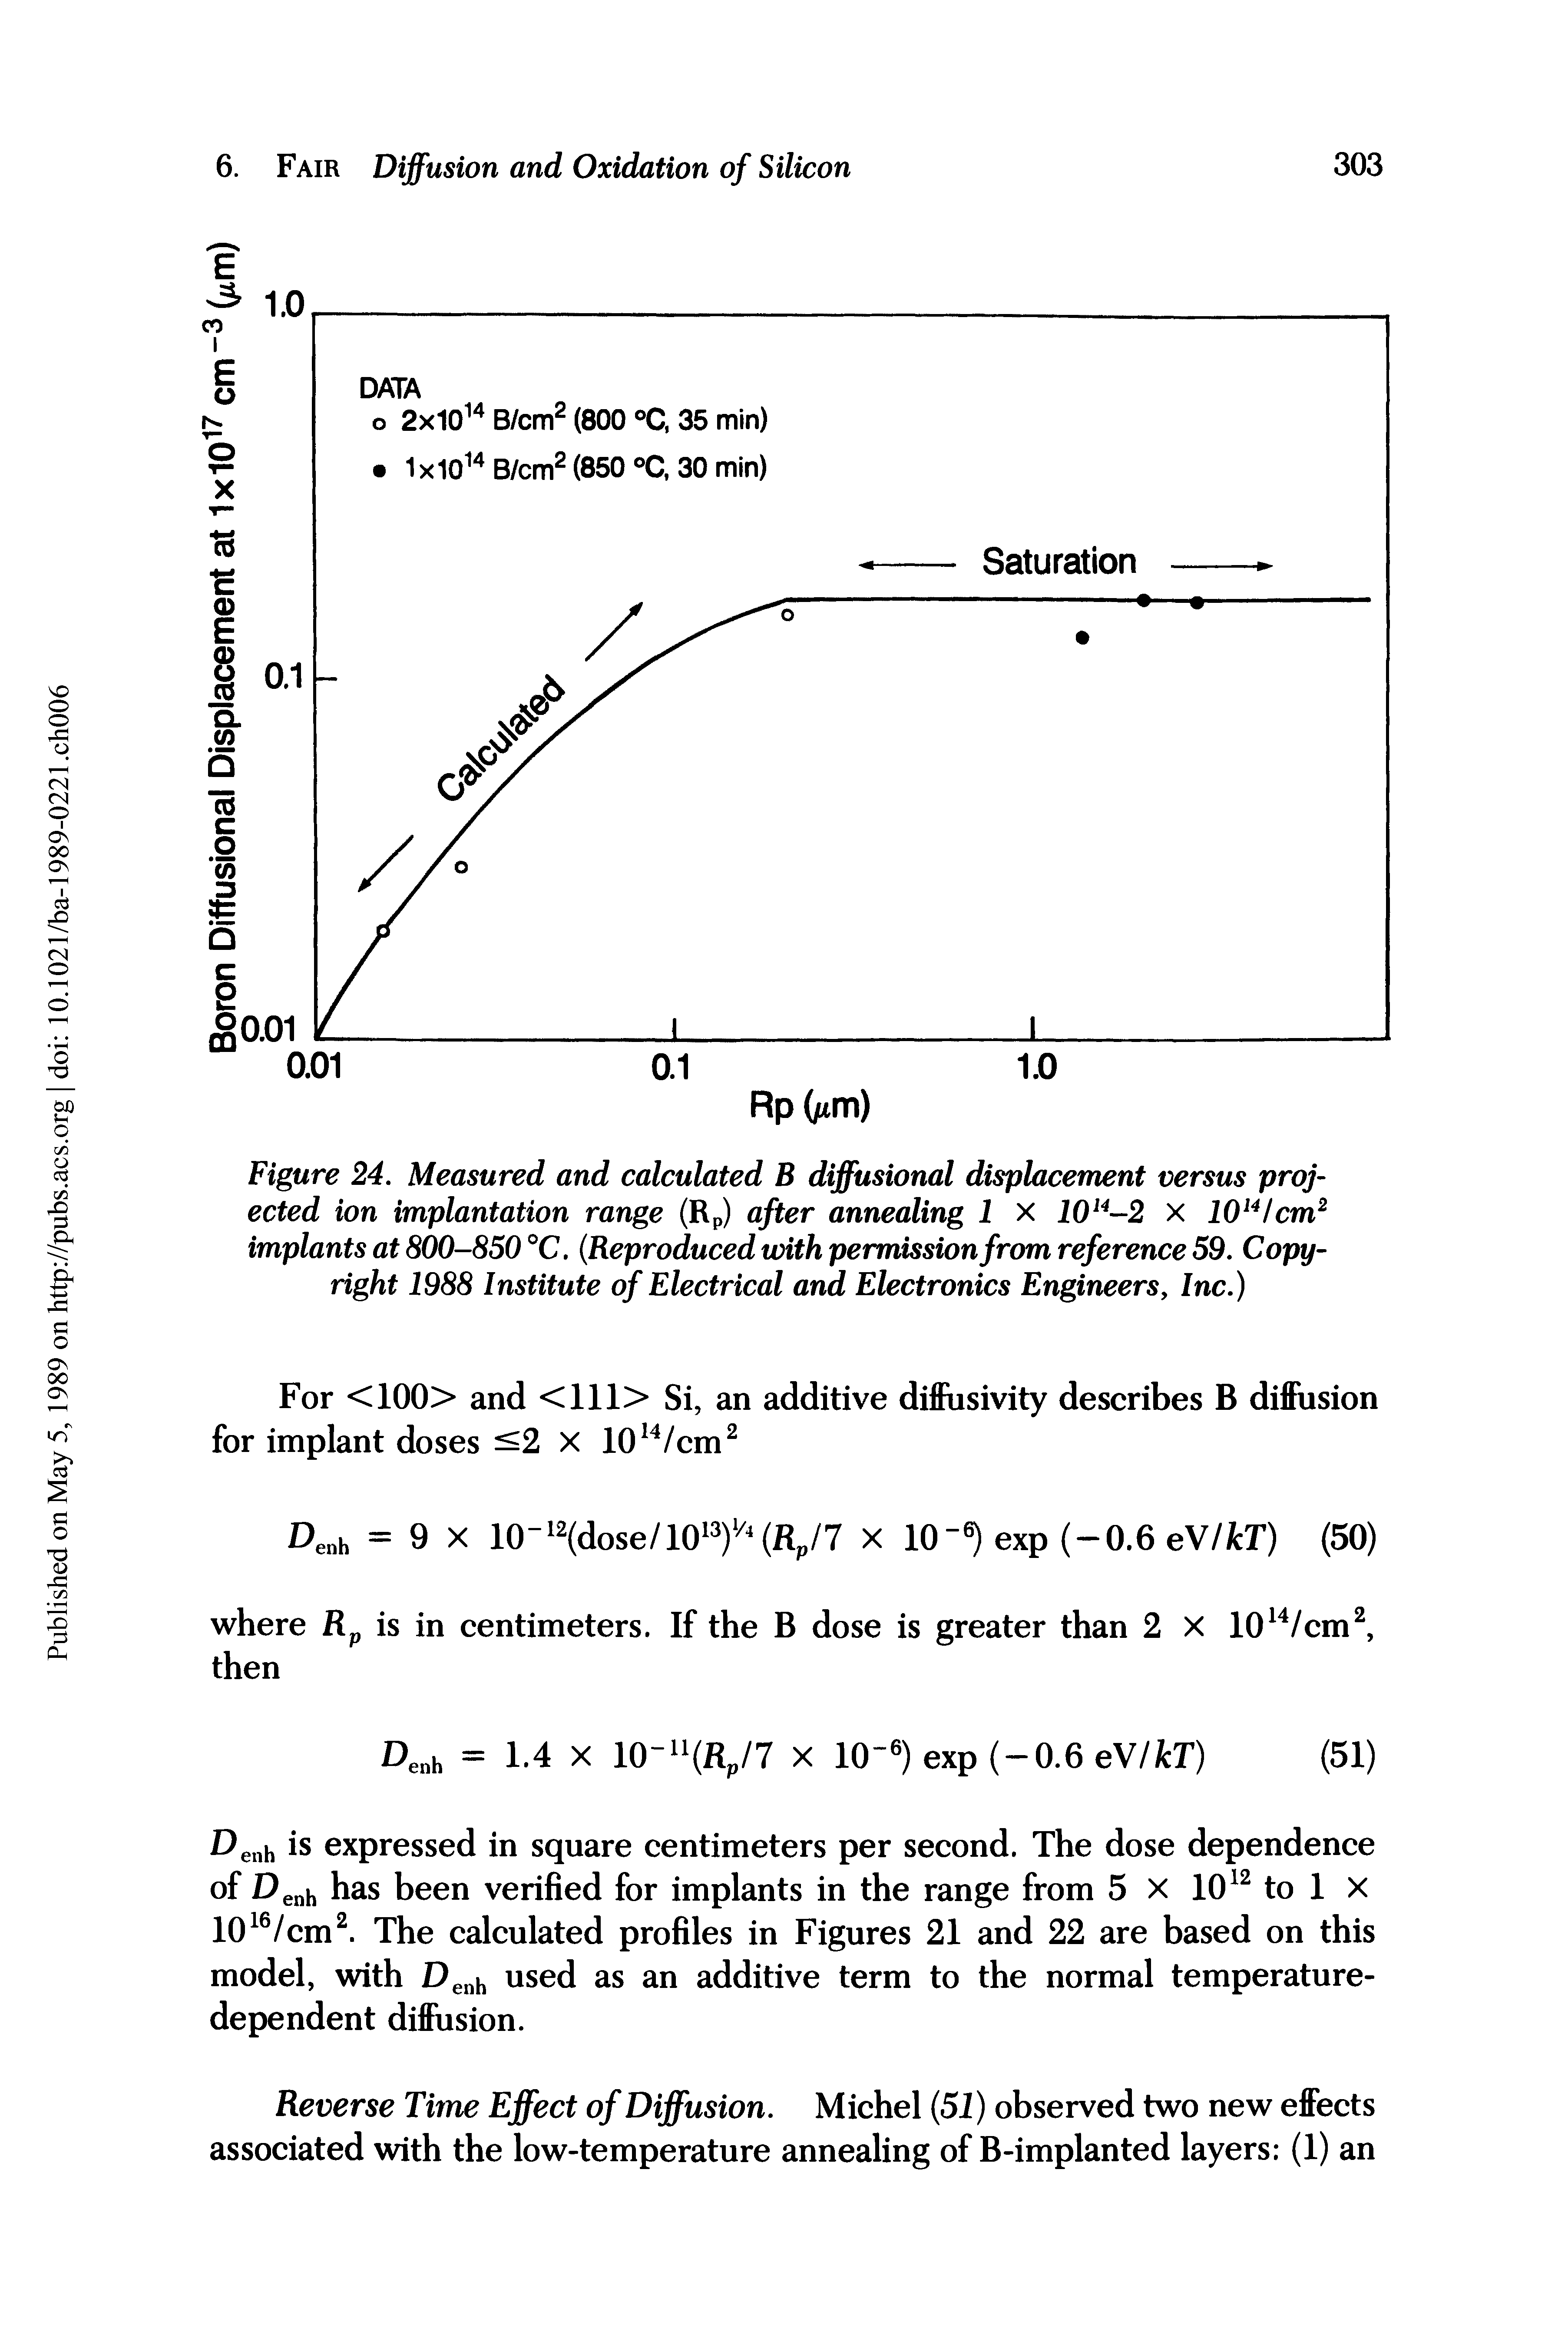 Figure 24. Measured and calculated B diffusional displacement versus prof ected ion implantation range (Rp) after annealing 1 X 10l4-2 X 1014/cm2 implants at 800-850 °C. (Reproduced with permission from reference 59. Copyright 1988 Institute of Electrical and Electronics Engineers, Inc.)...